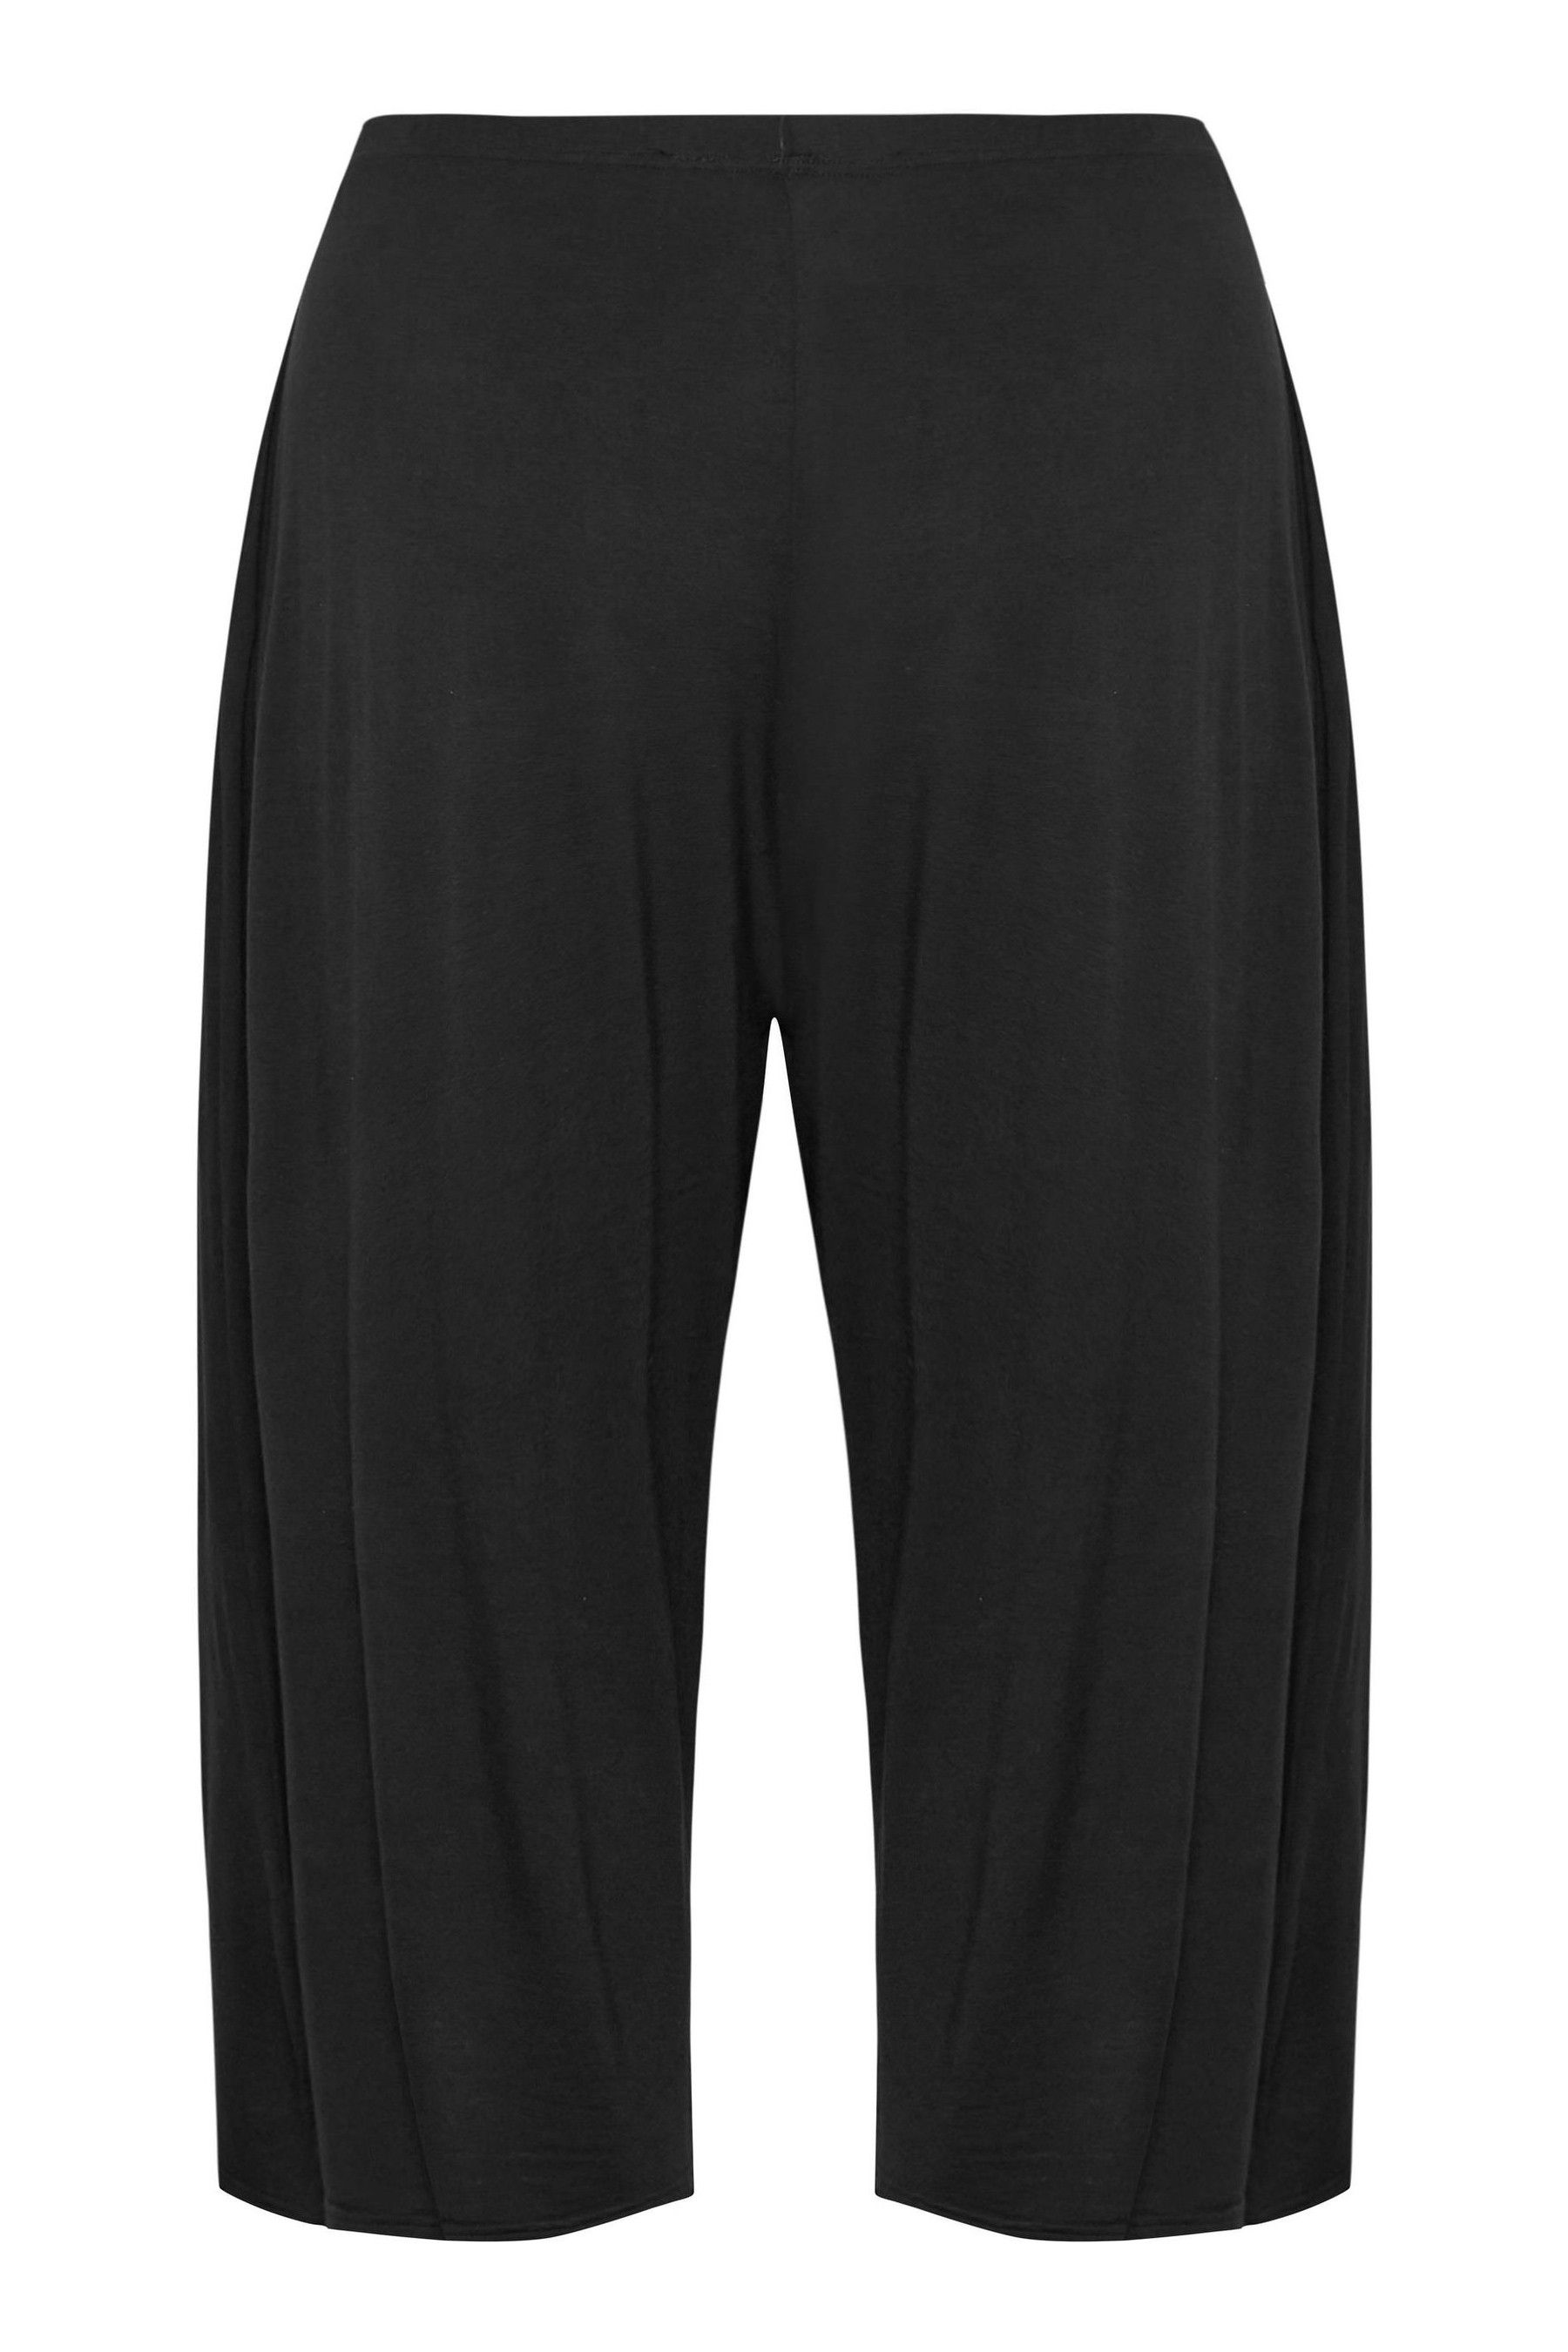 Buy Yours Curve Black Limited Extra Wide Leg Culottes from the Next UK ...